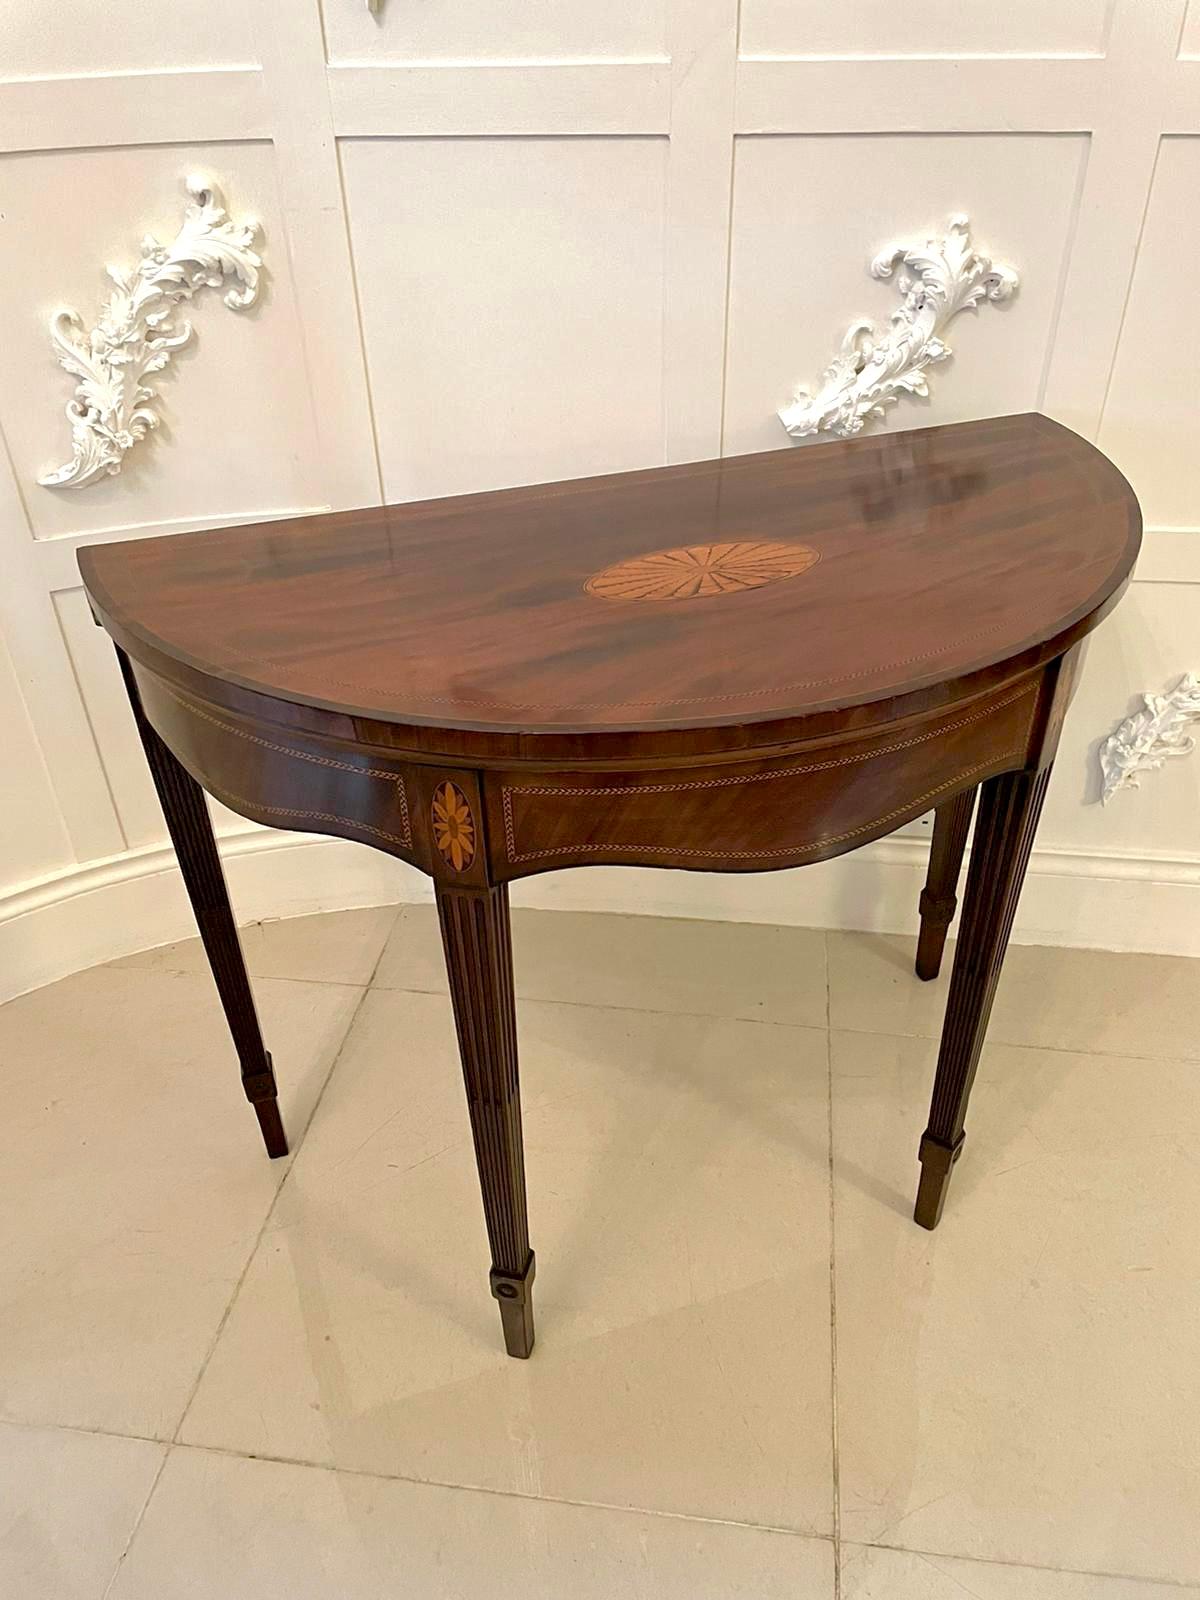 Outstanding Quality Antique Edwardian Inlaid Mahogany Demi-Lune Tea Table 6